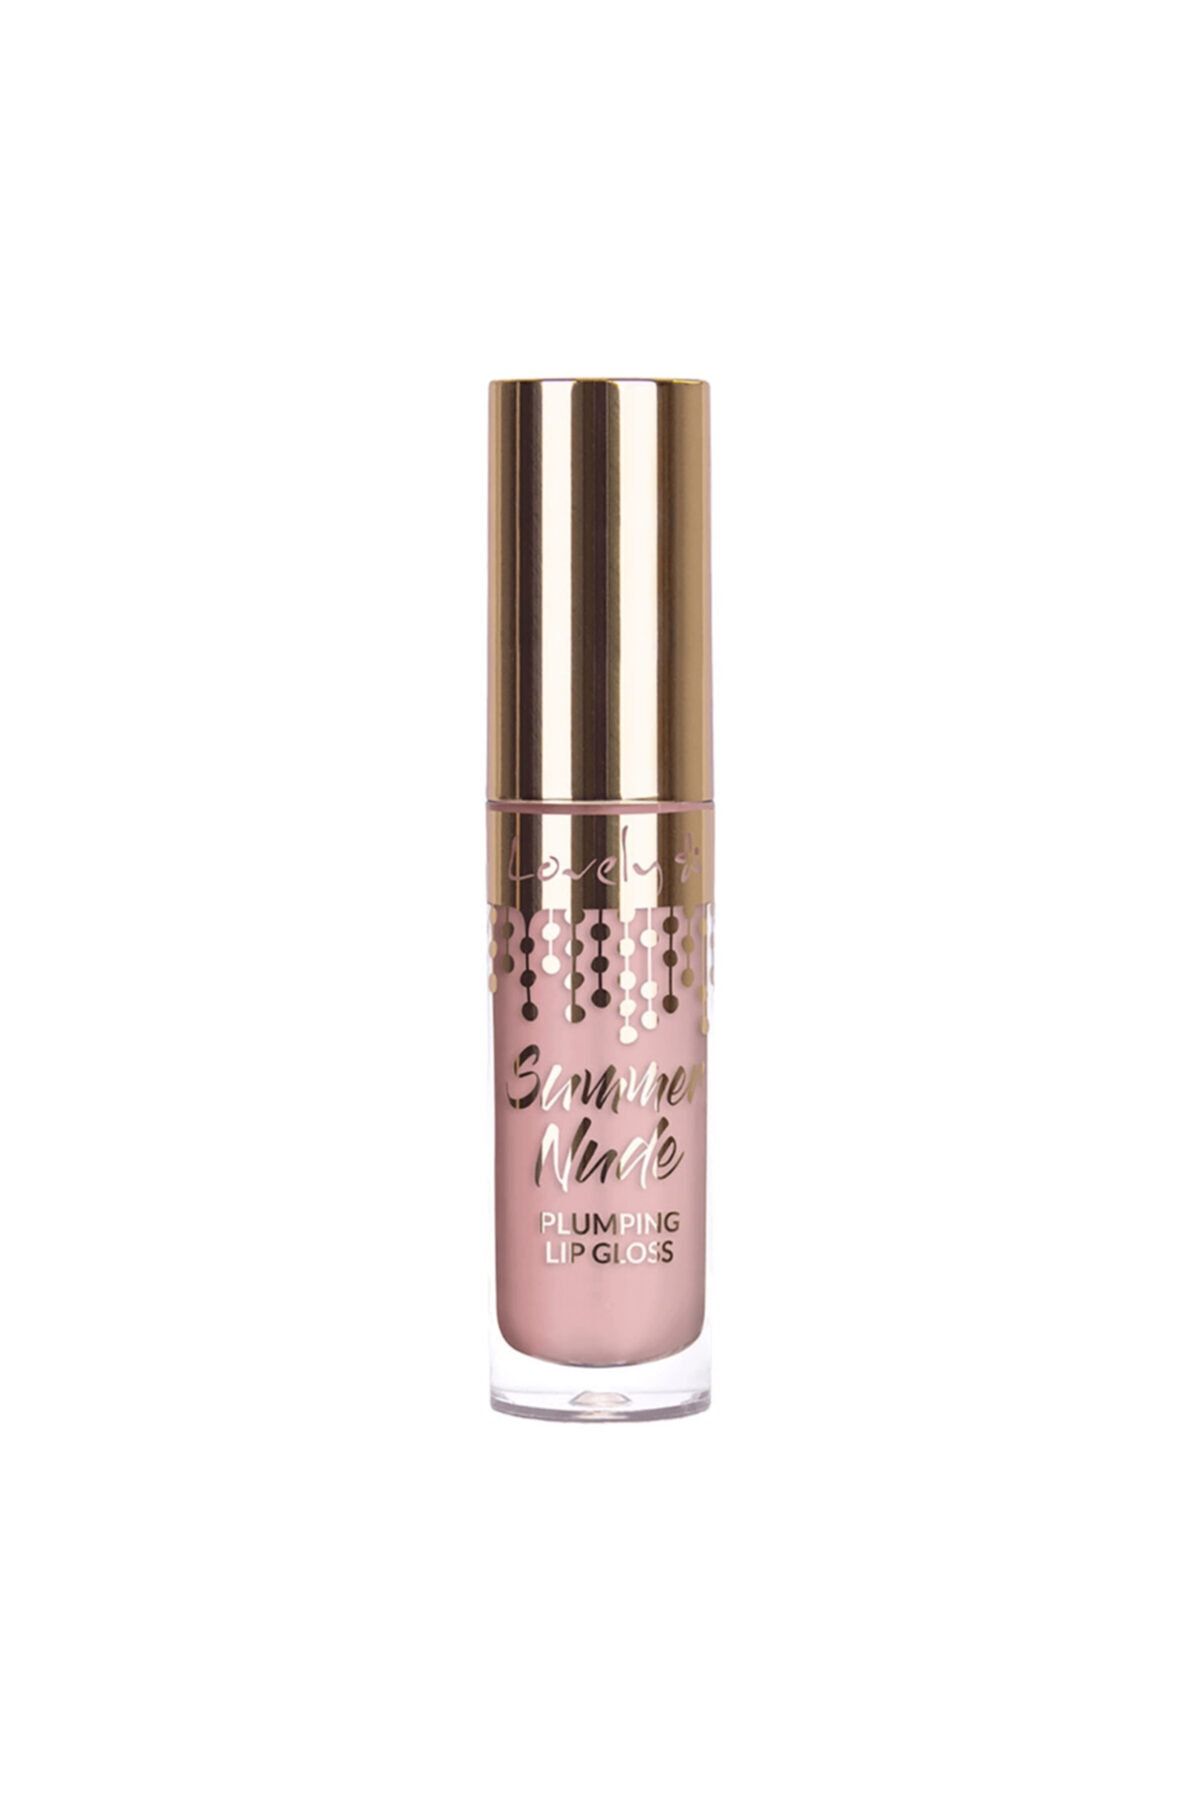 Lovely Summer Nude Plumping Lip Gloss No: 3